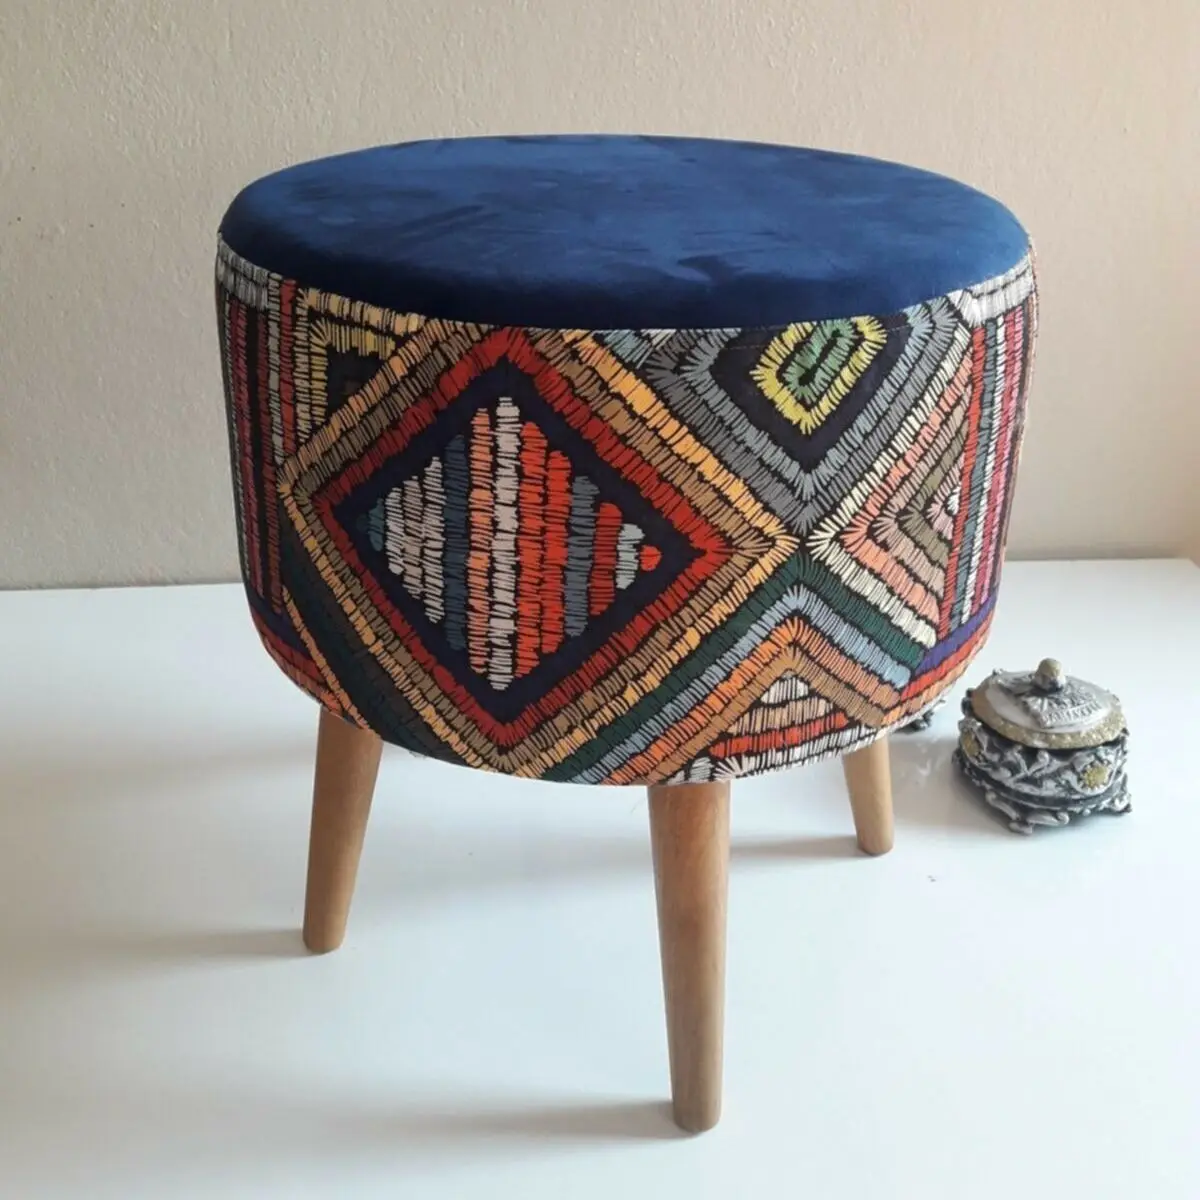 

Retro wooden legs decorative ethnic top navy blue patterned cylinder pouf bench stool decorative pouf rustic bench coffee table